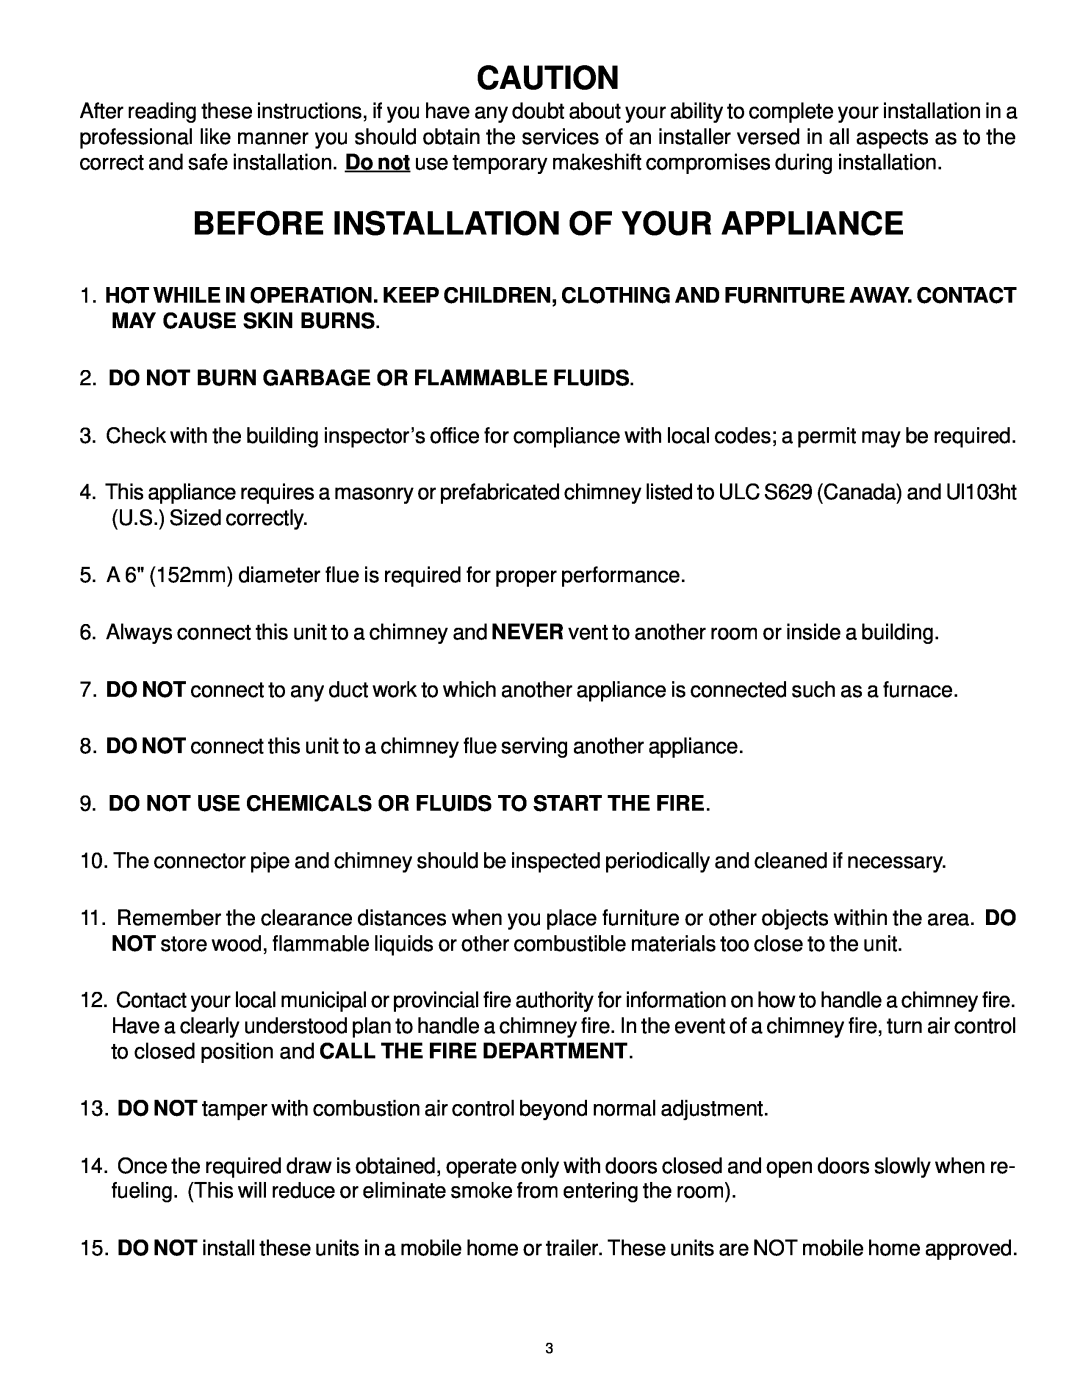 Vermont Casting WOOD STOVE owner manual Before Installation Of Your Appliance, Do Not Burn Garbage Or Flammable Fluids 